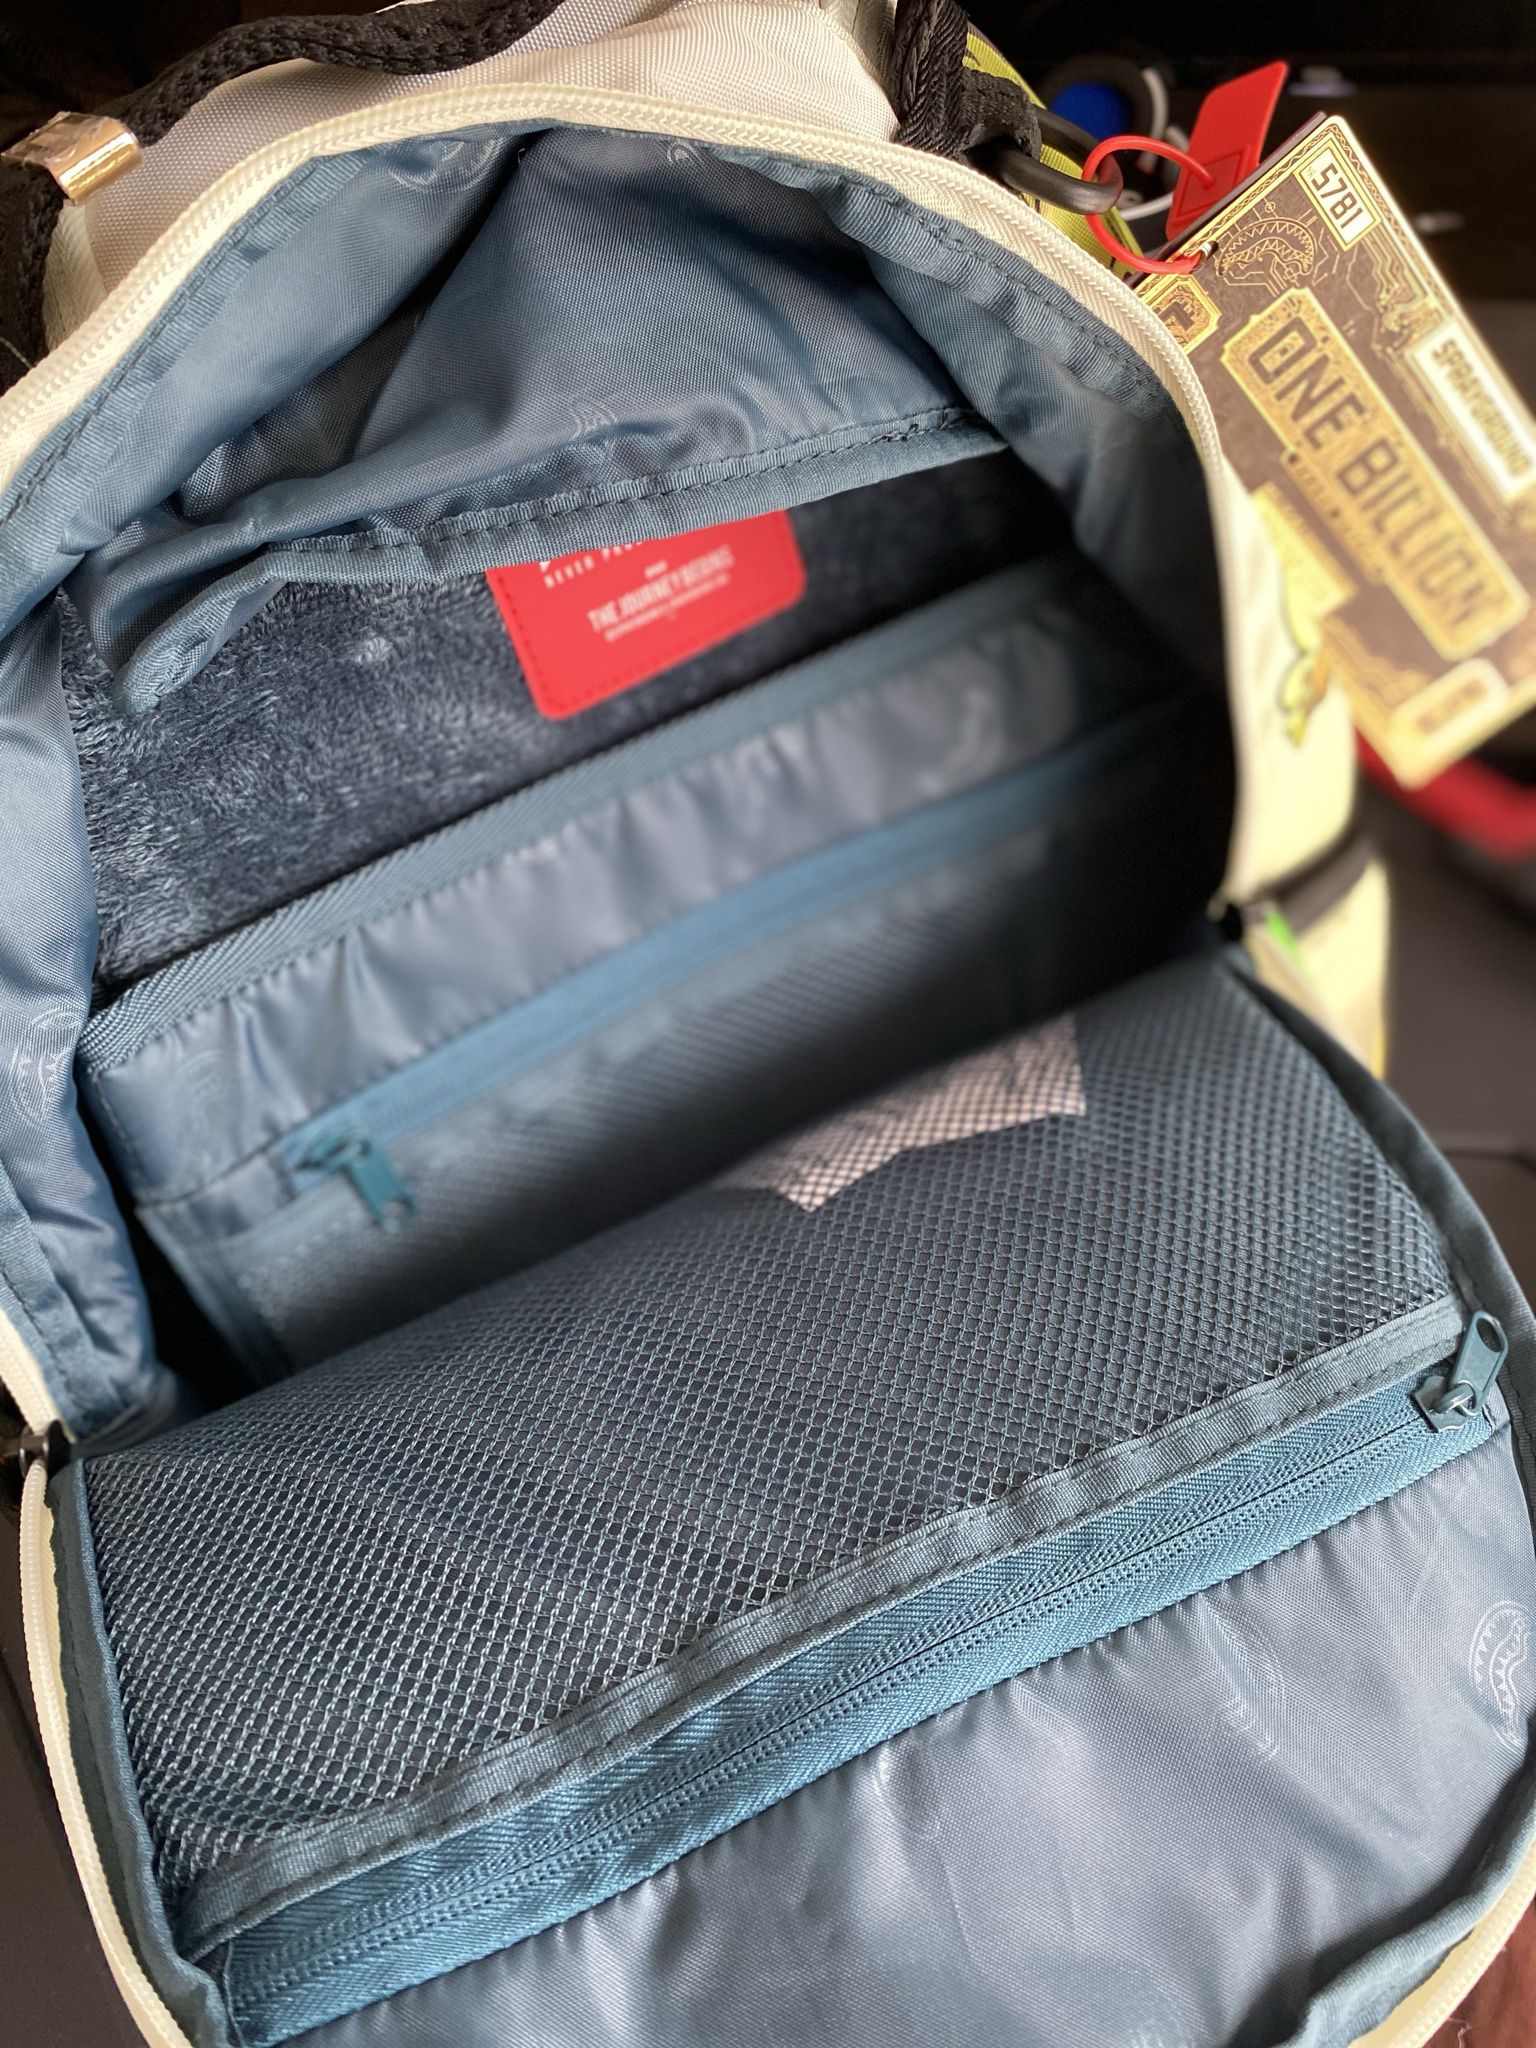 Sprayground Limited Edition Backpack Sold Out Online for Sale in Dallas, TX  - OfferUp